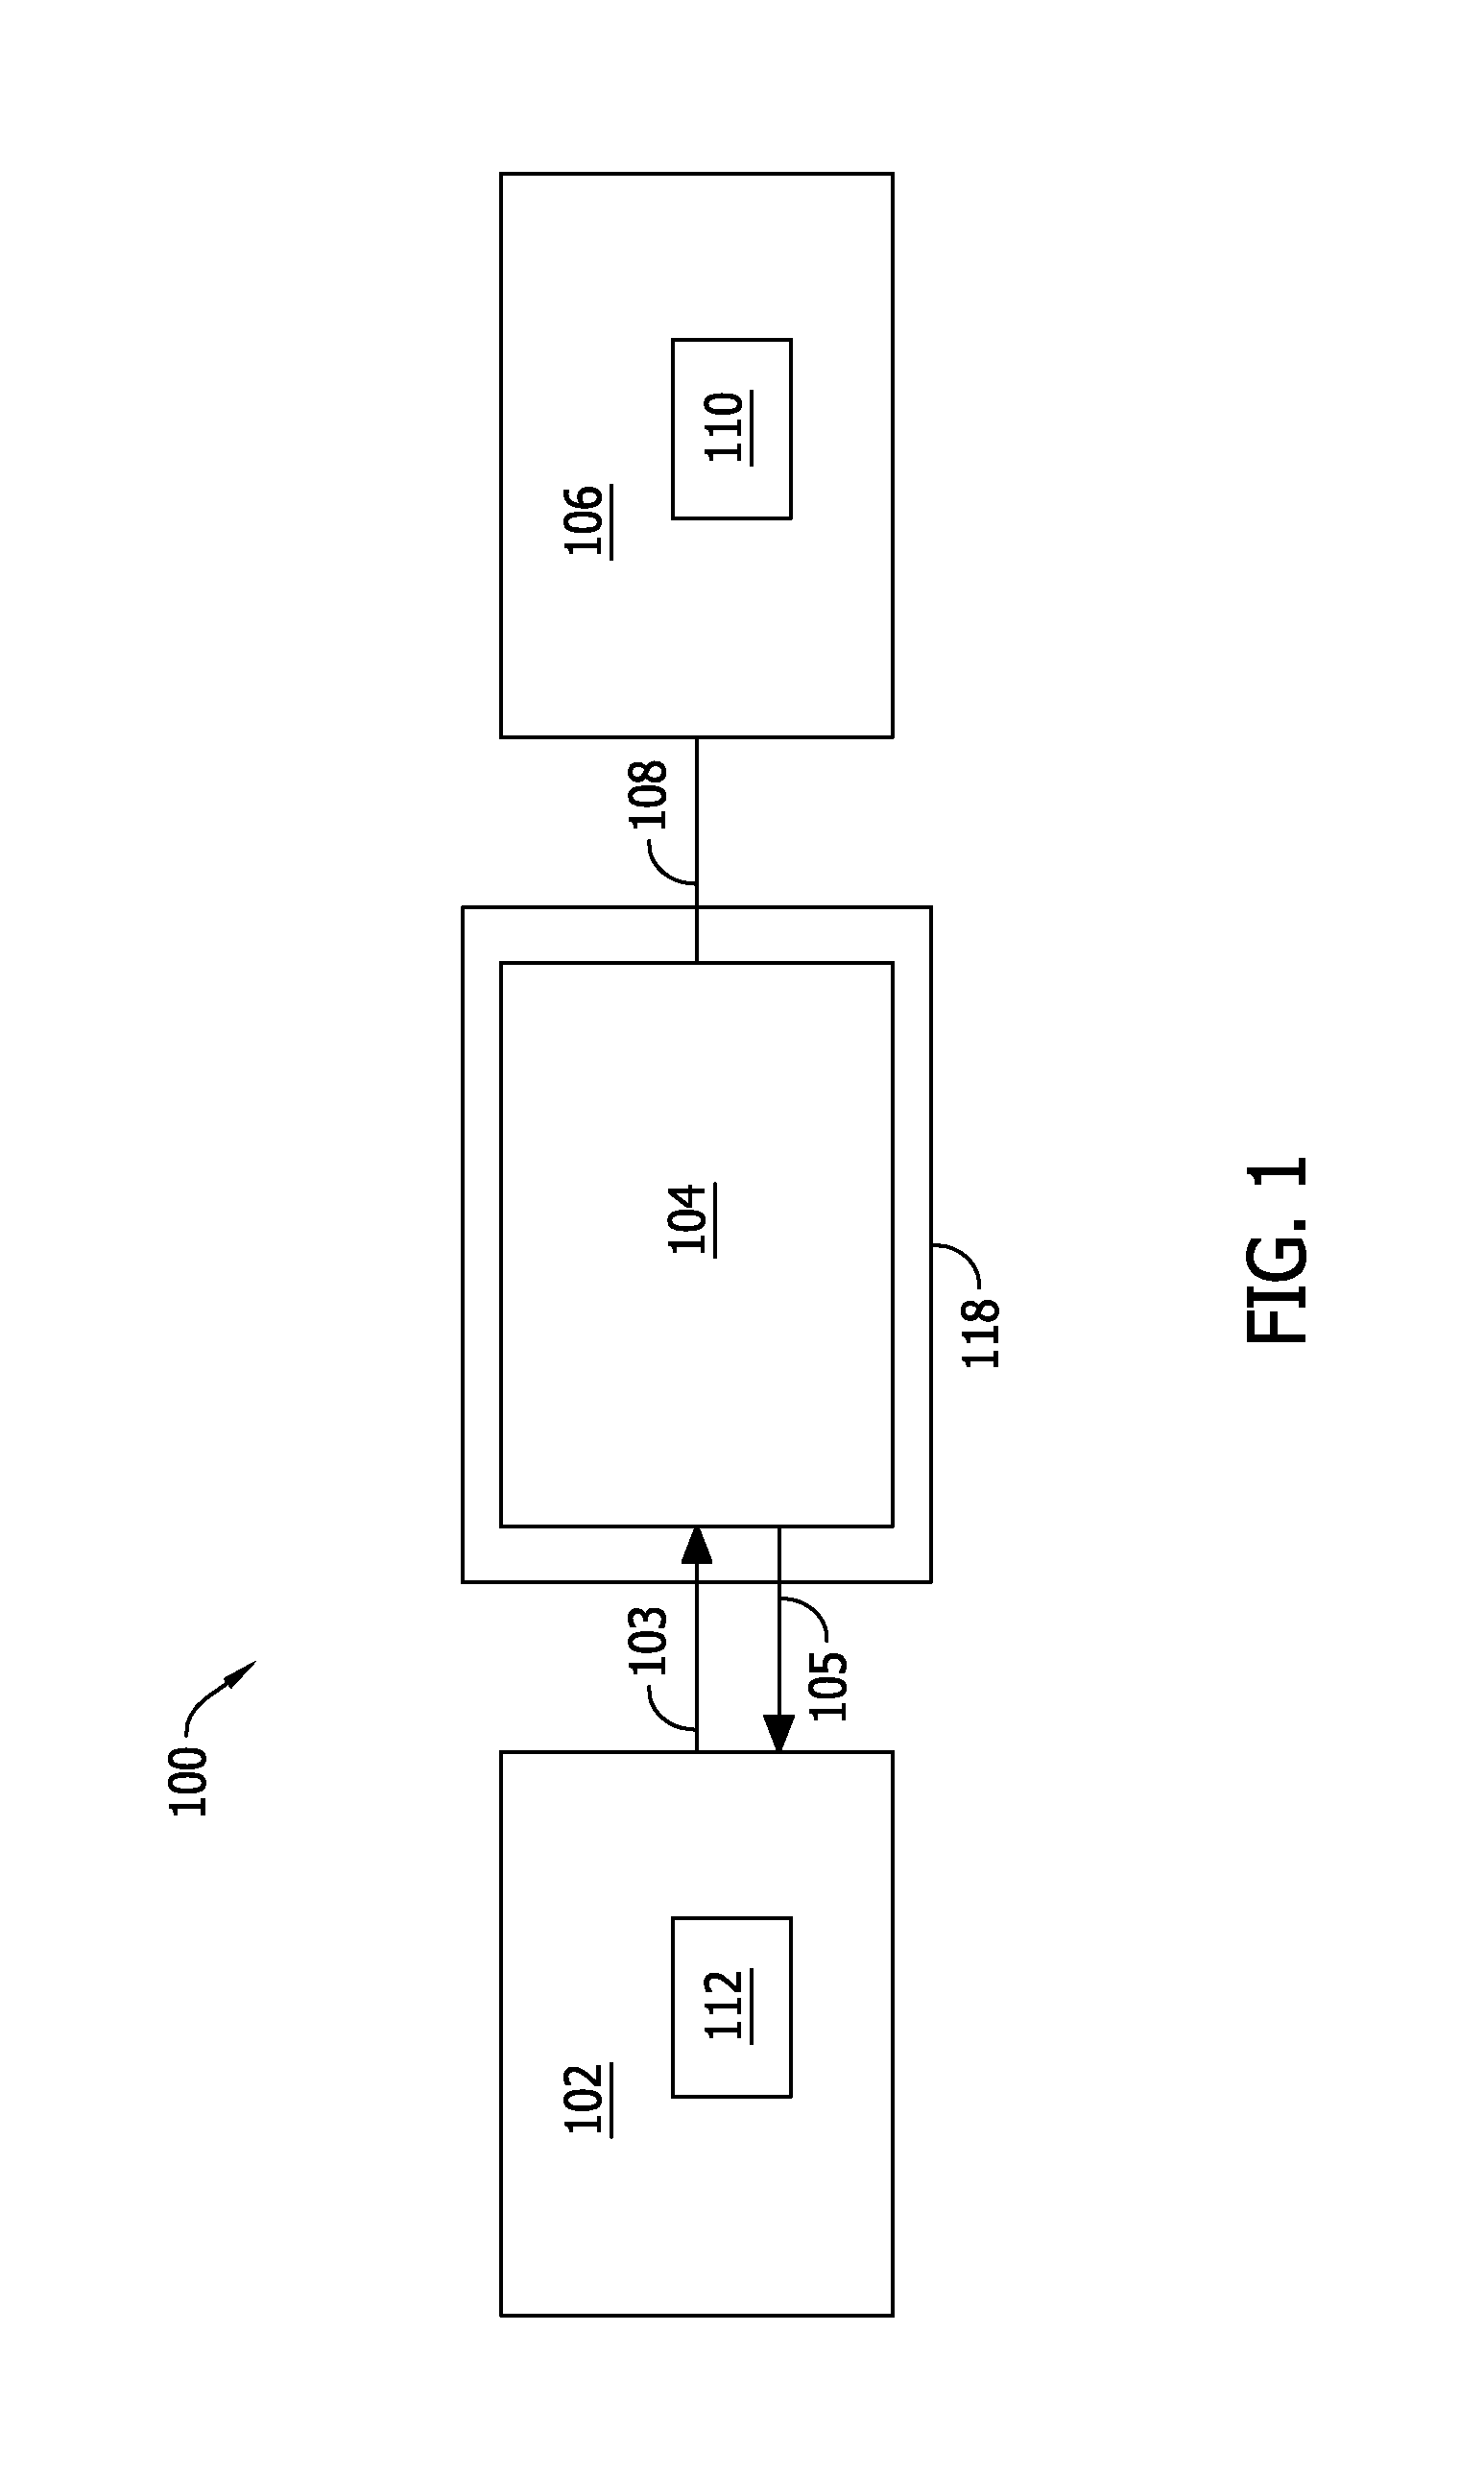 System and method for controlling a motor